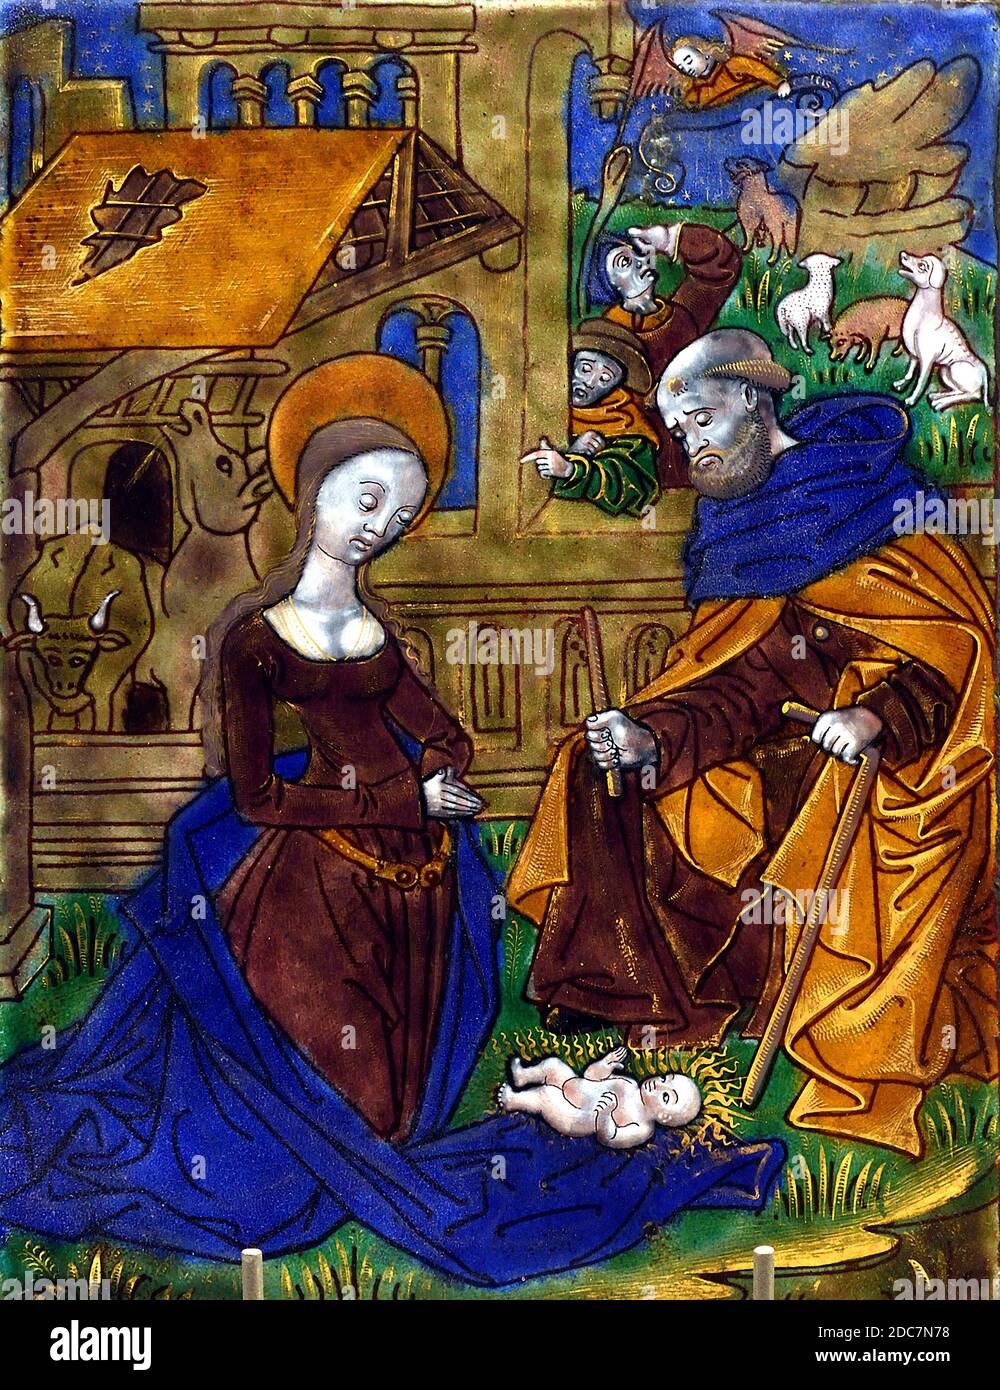 The Adoration of the Magi 1500 - 1525 Atelier du Maitre du Triptyque D'Orleans - Workshop of the Master of the D'Orleans Triptych,  France, French, Polychrome enamels on copper Stock Photo